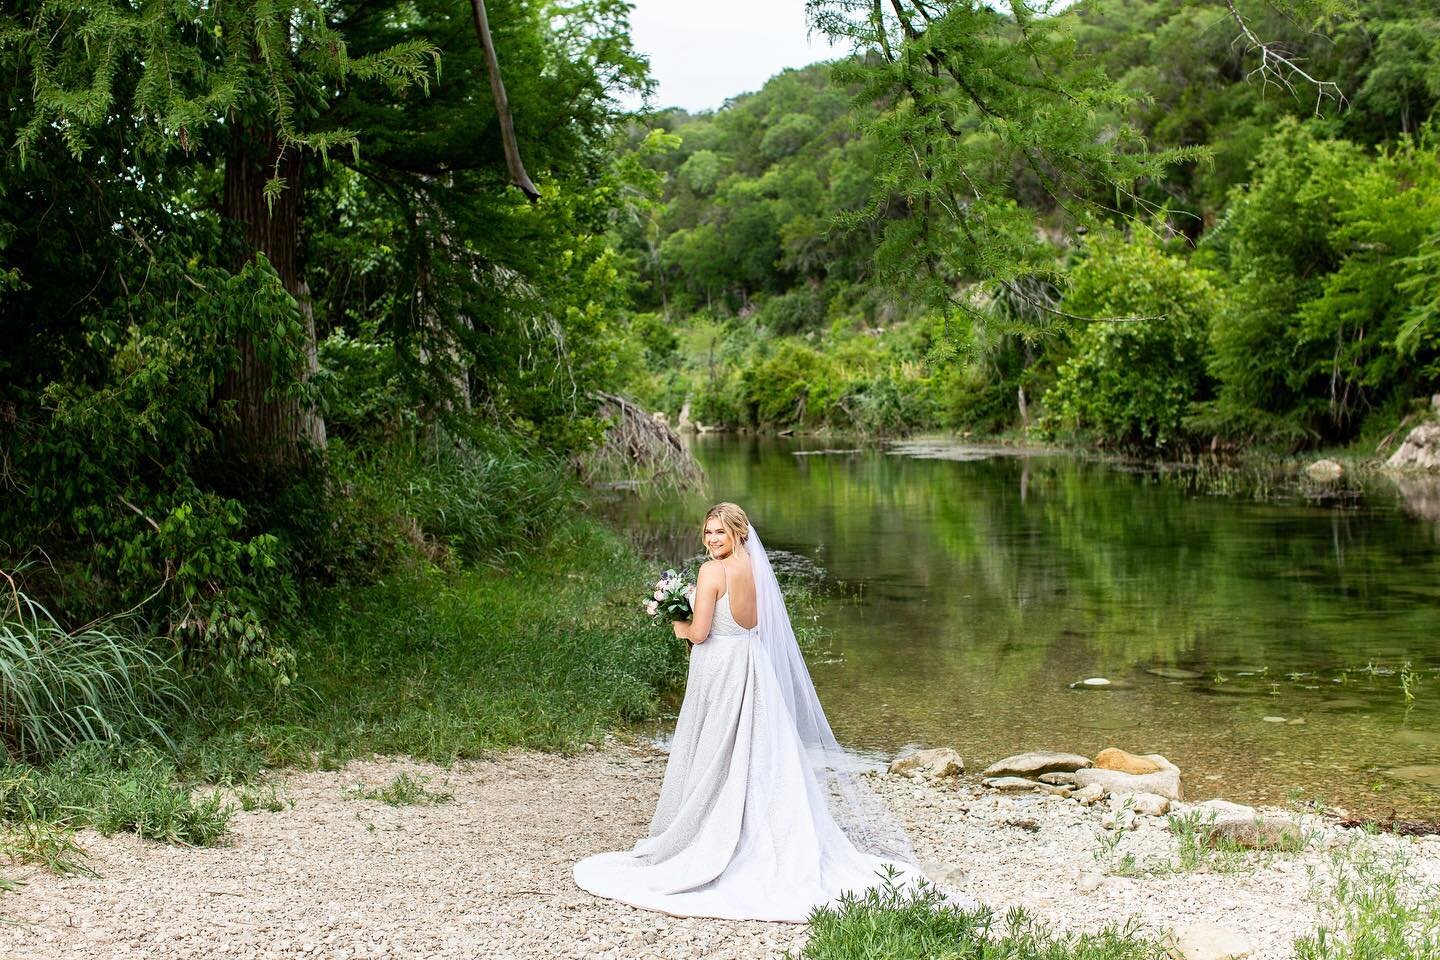  don&rsquo;t mind three post in one day when it&rsquo;s for one of my brides!!! So thankful @victoriiaaaaaa_hull trusted me with this whimsical location in Wimberley for her bridals! ✨

HMU: @primandpowder